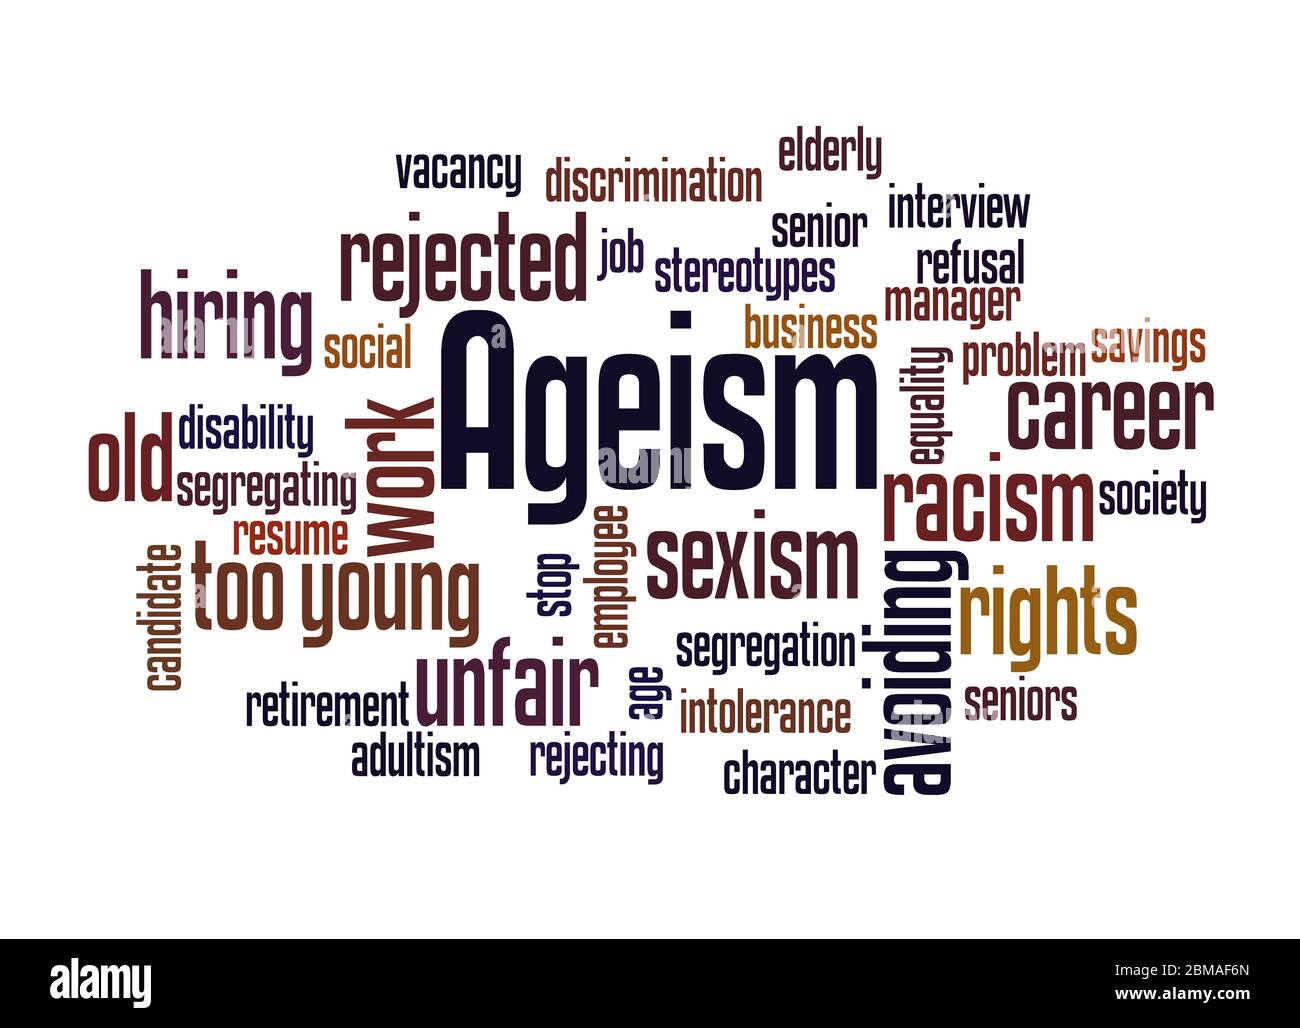 Ageism word cloud concept on white background. Stock Photo